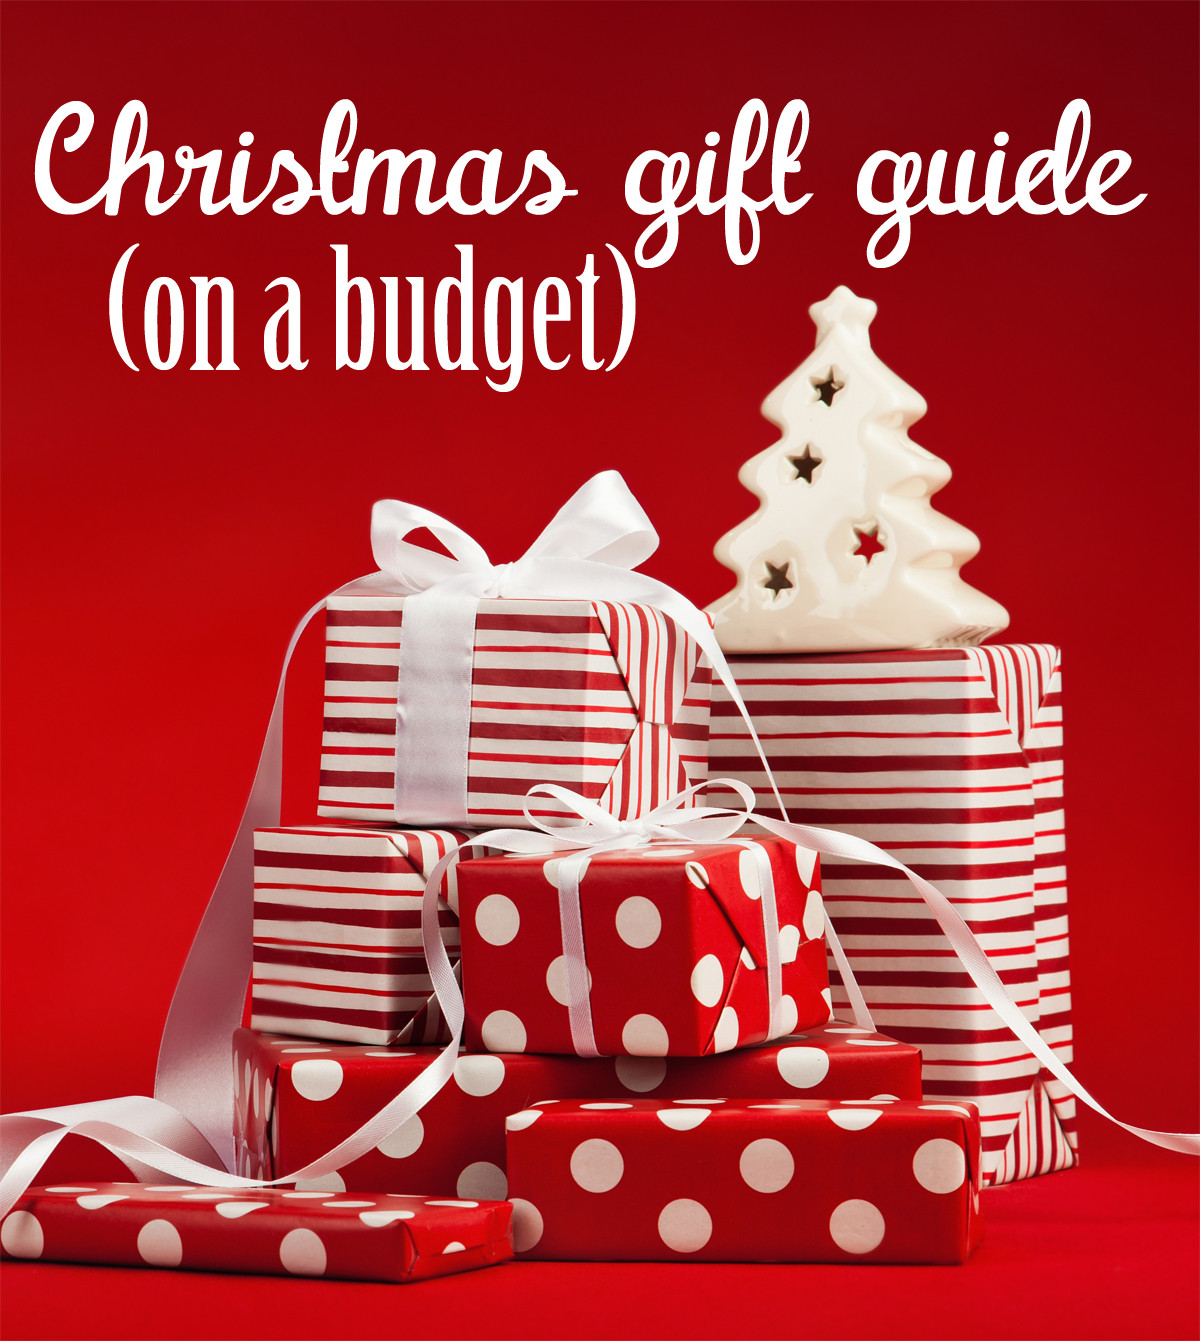 Holiday Gift Giving Ideas
 Bud friendly Christmas t ideas for the whole family